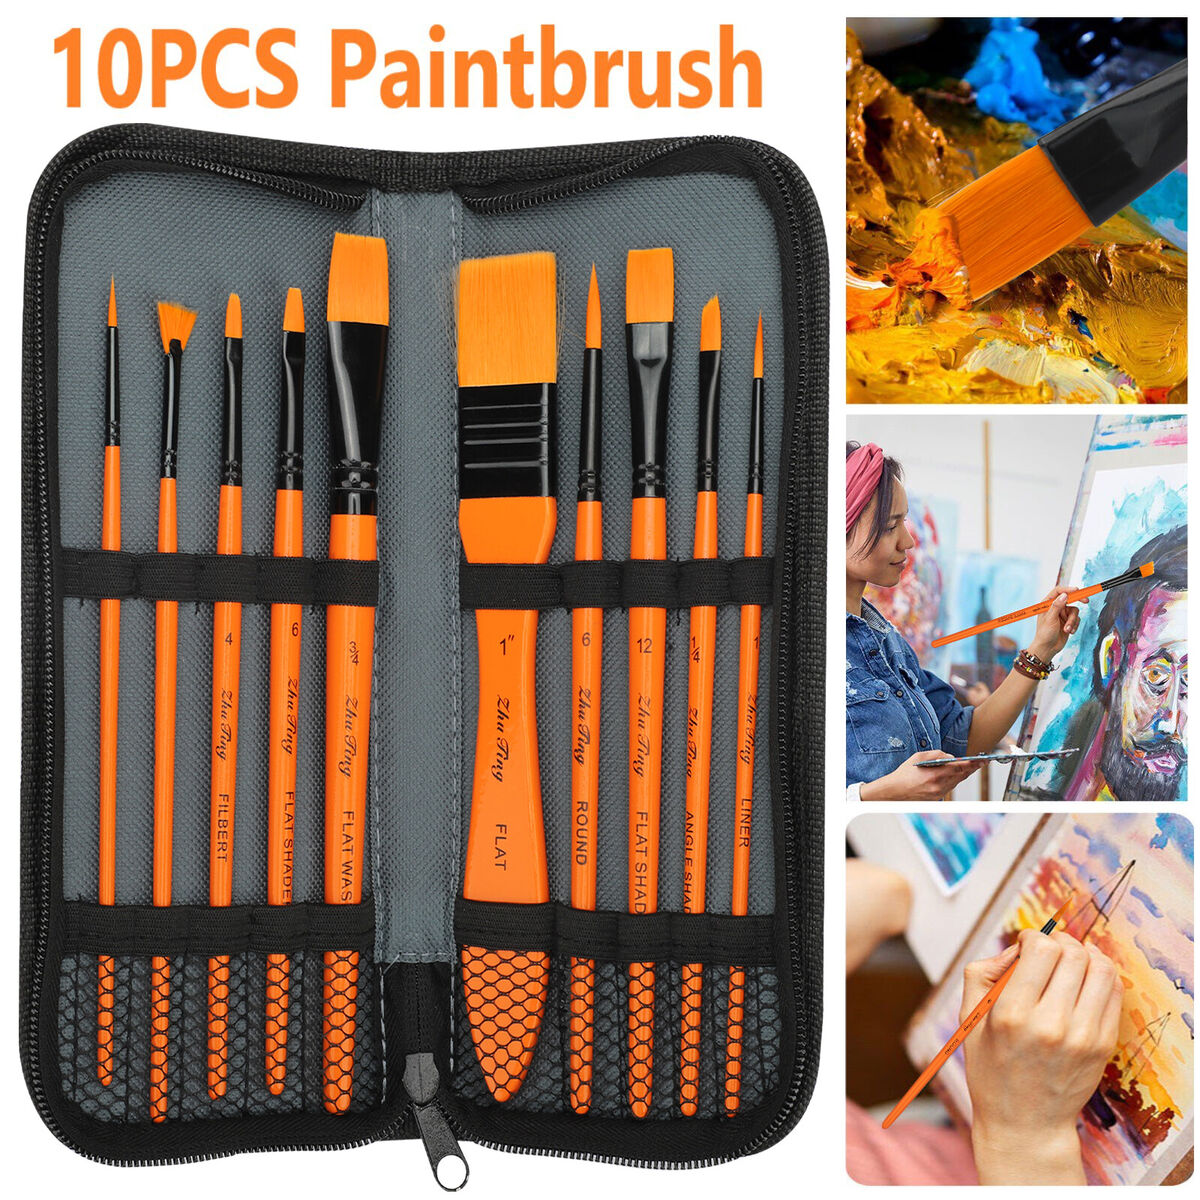 Bazic Assorted Size Oil Paint Brush Set - 9/Pack